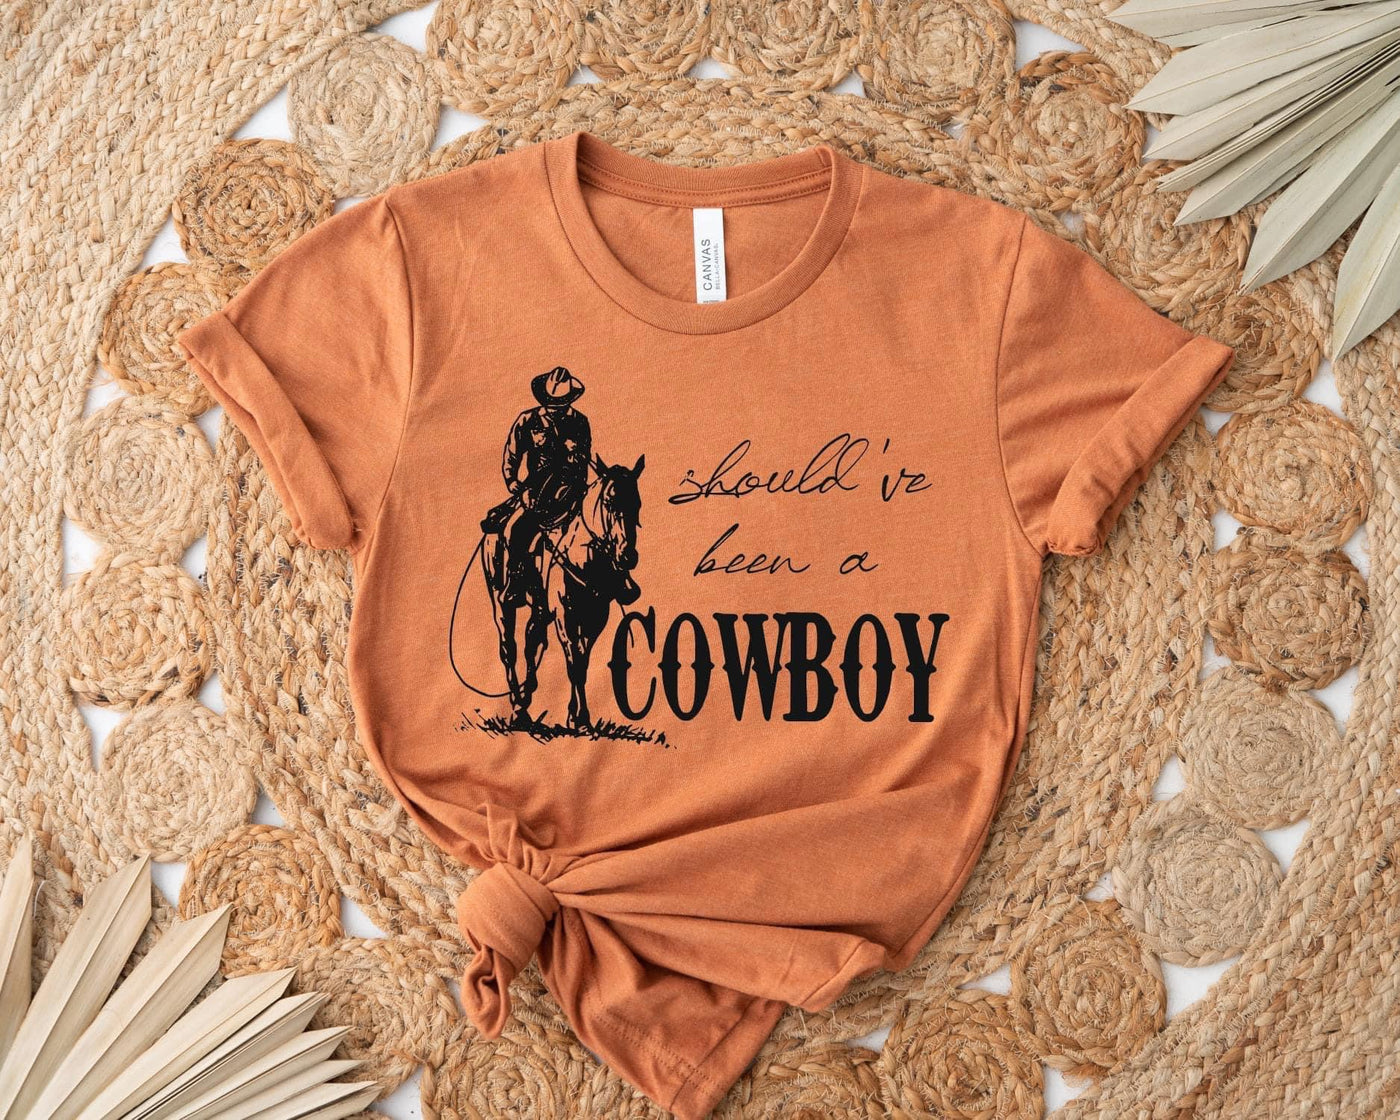 Should Have Been A Cowboy Tee